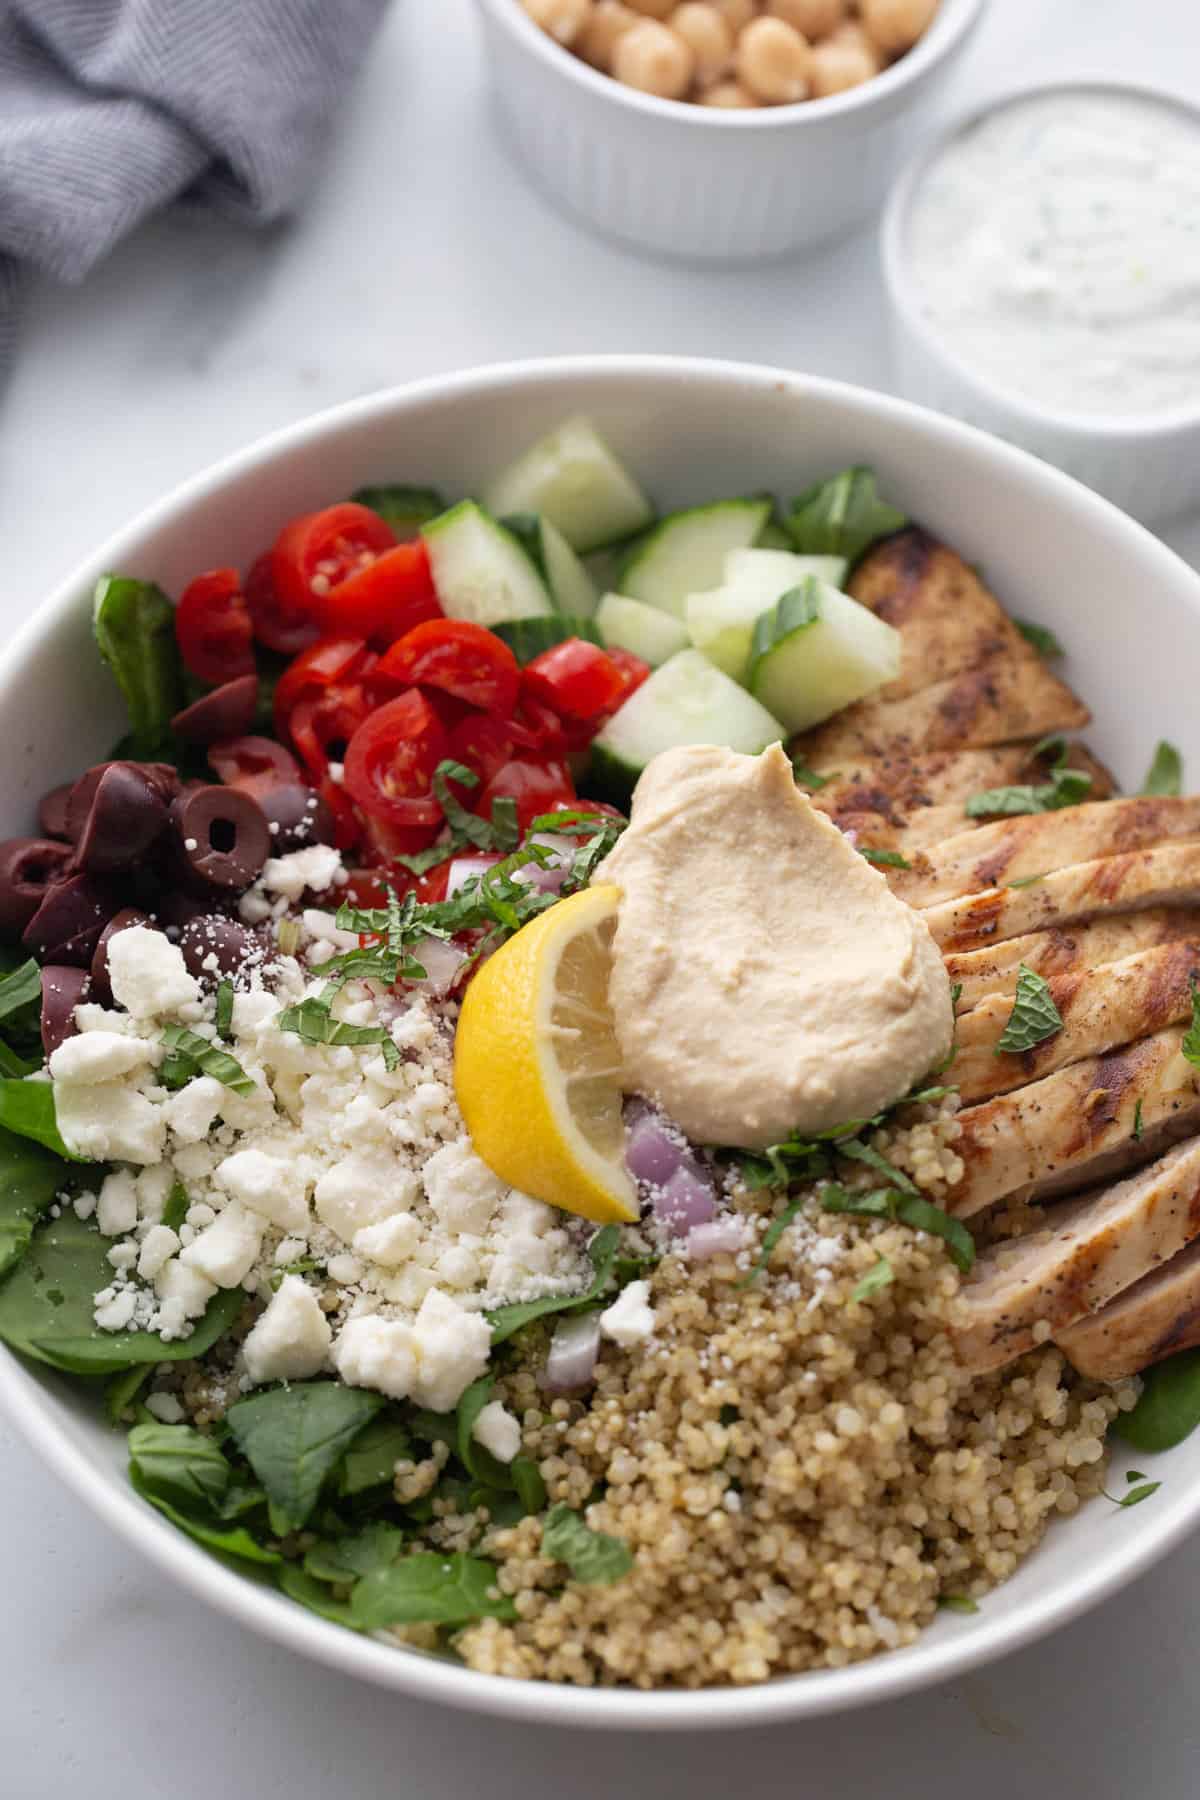 Medium white bowl filled with chicken, quinoa, feta, veggies, green, hummus and garnished with a lemon.